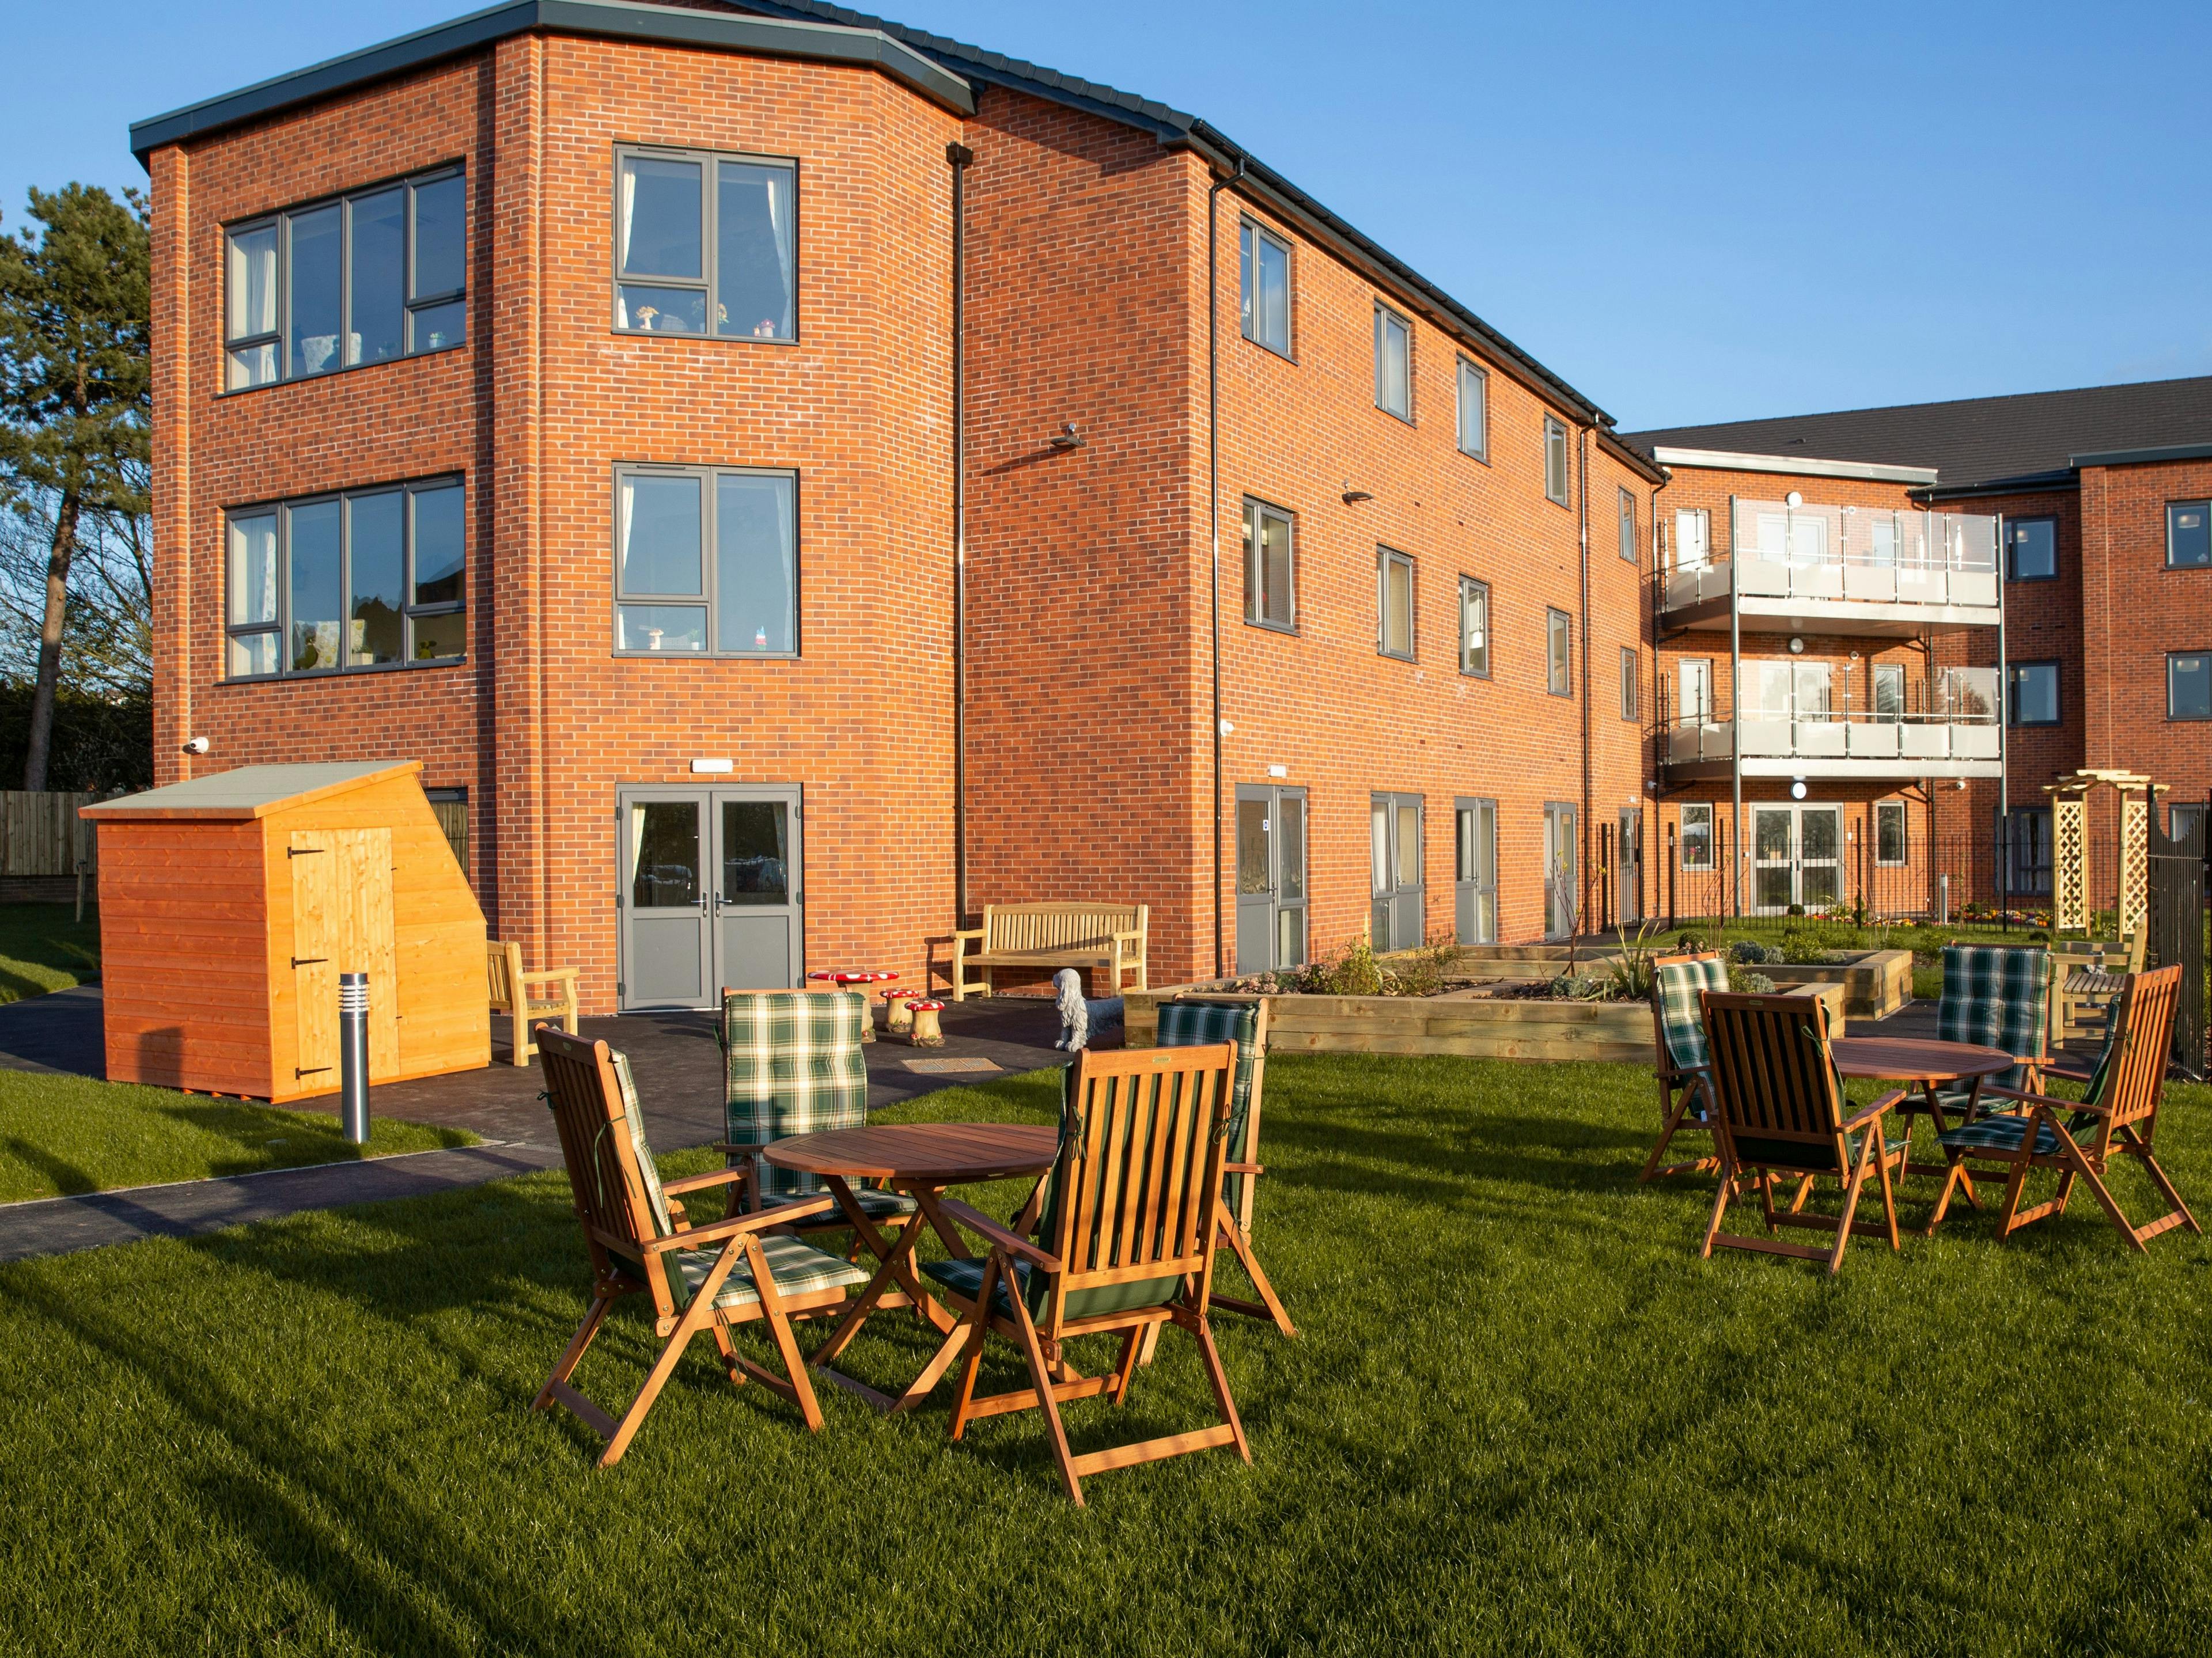 Exterior of Cloverleaf care home in Lincoln, Lincolnshire